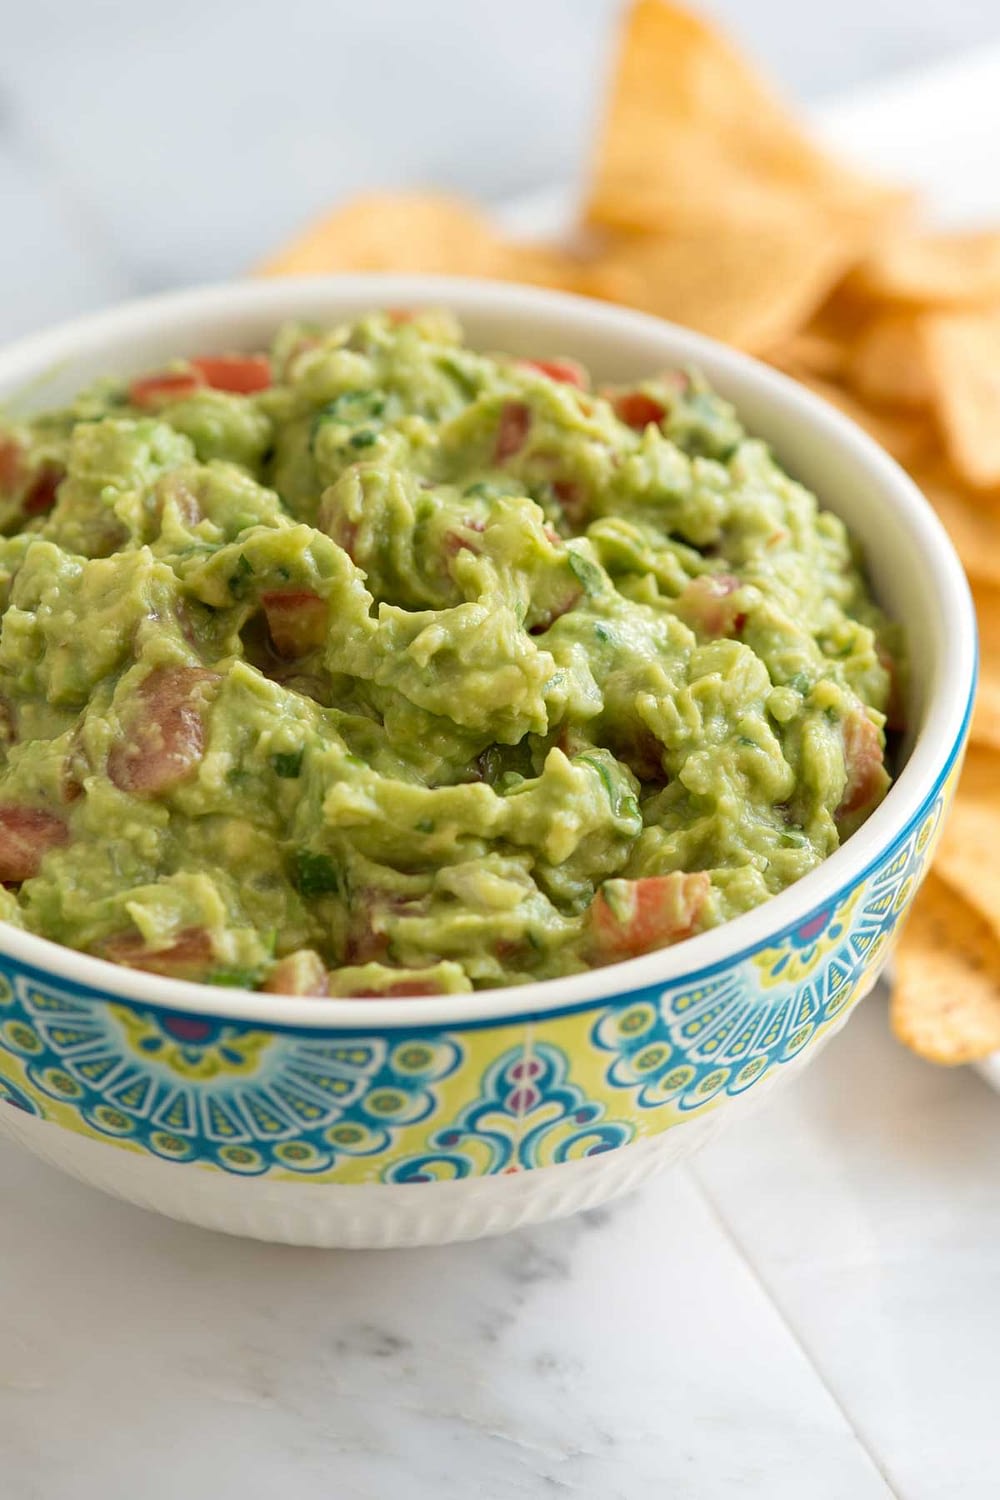 How To Make The Best, Tastiest Guacamole